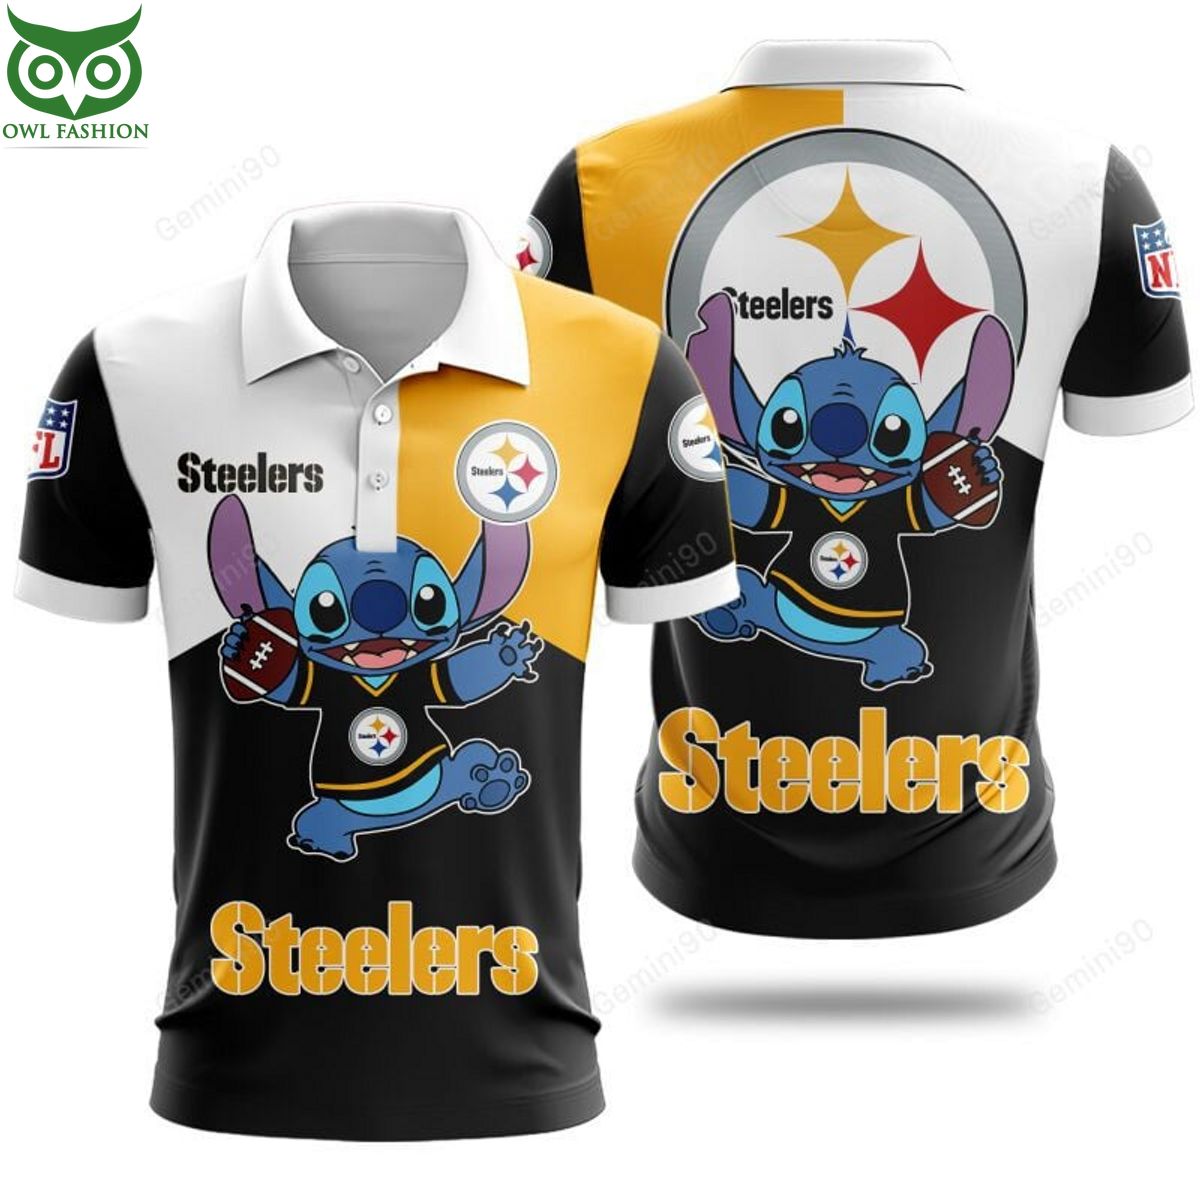 stitch favourite nfl pittsburgh steelers 3d shirt hoodie polo 1 zb9wP.jpg